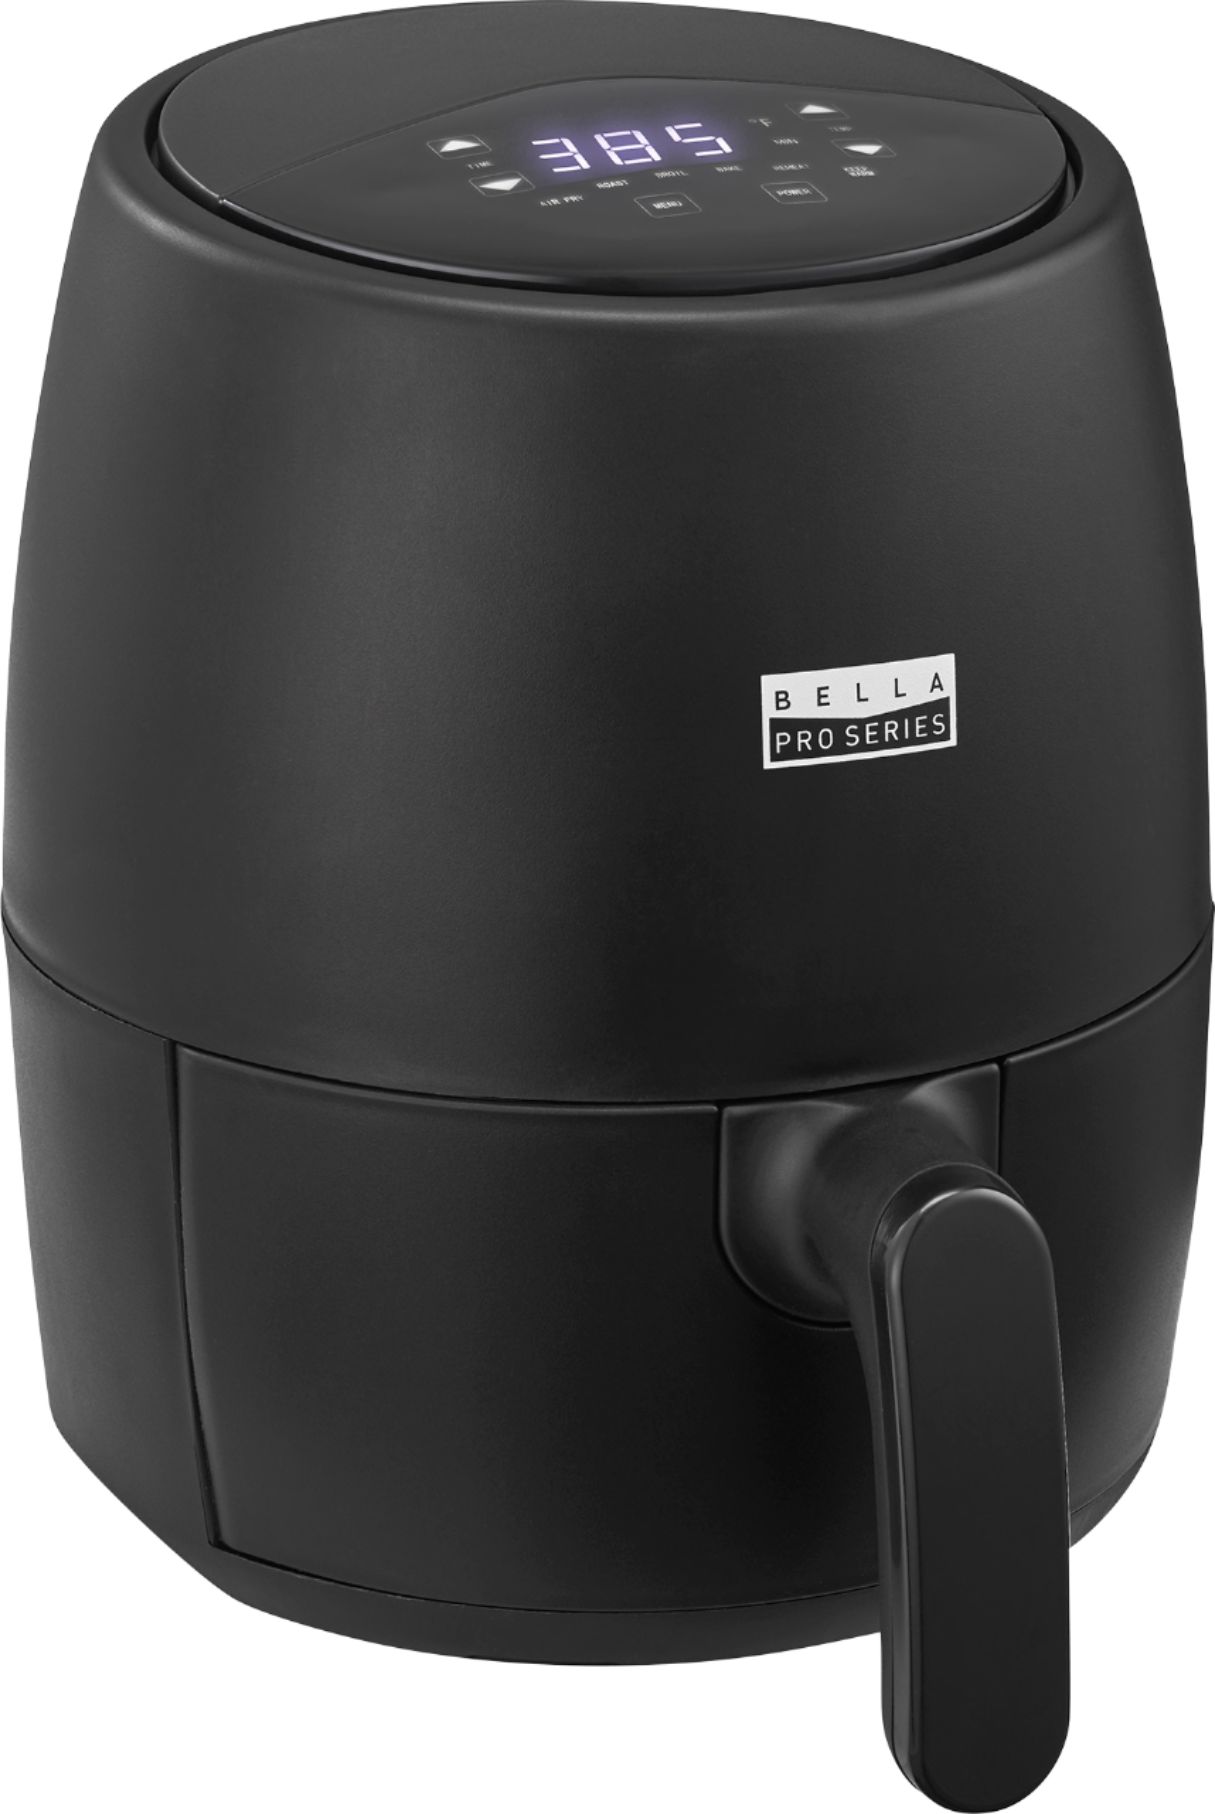 Angle View: Bella Pro Series - 6-qt. Digital Air Fryer with Stainless Finish - Ink Blue Stainless Steel